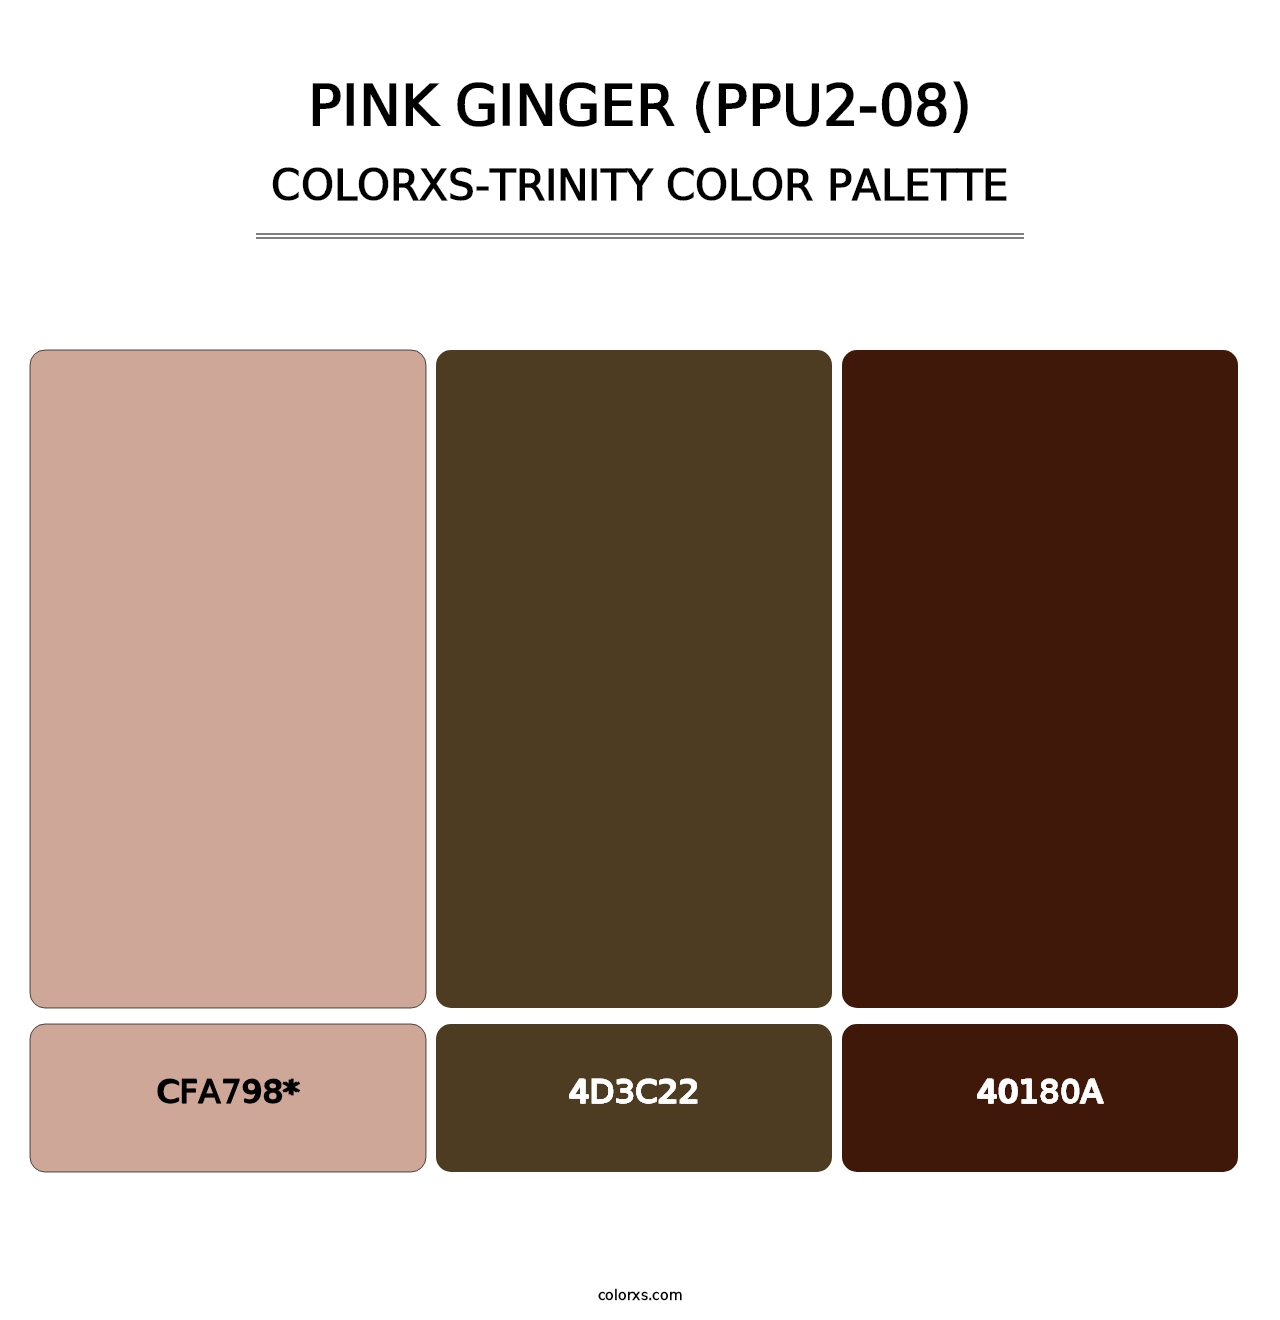 Pink Ginger (PPU2-08) - Colorxs Trinity Palette